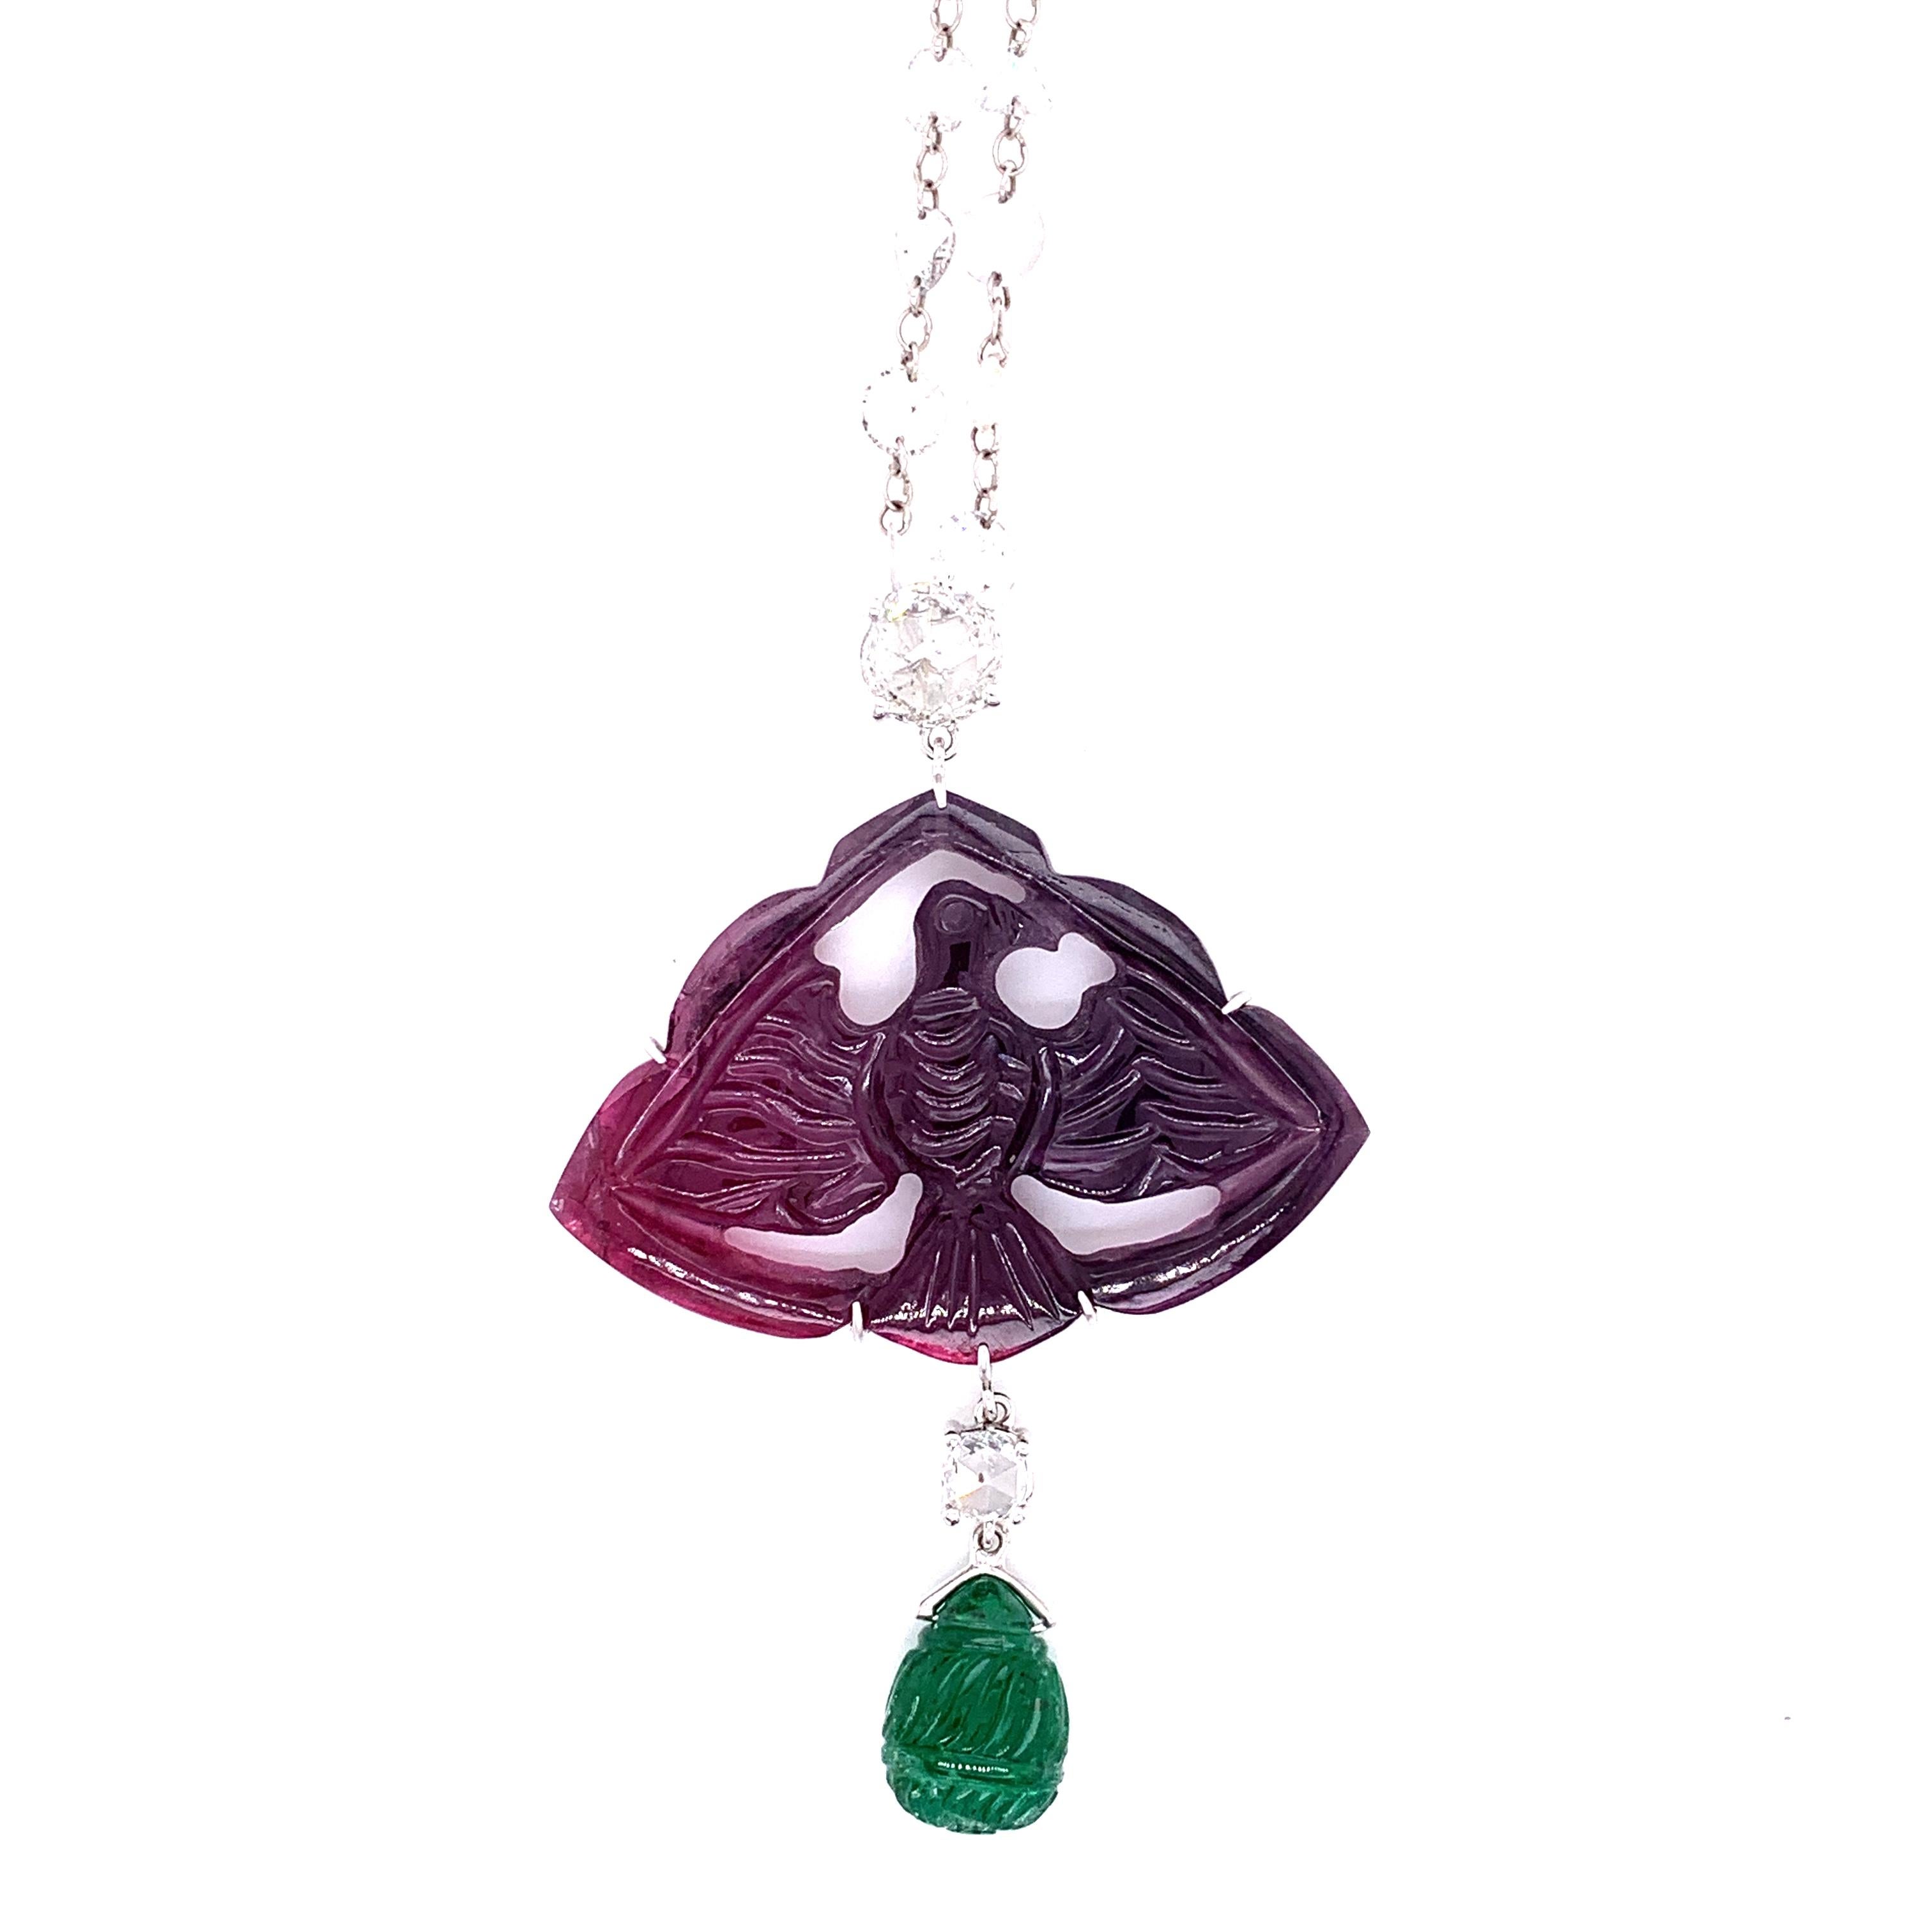 27 Carat Carved Mughal Tourmaline, Emerald, and White Diamond Gold Necklace :

A very beautiful and rare jewel, it features a gorgeous Mughal-era carved tourmaline weighing 27.29 carat as well as a Mughal-era carved emerald drop weighing 4.89 carat,